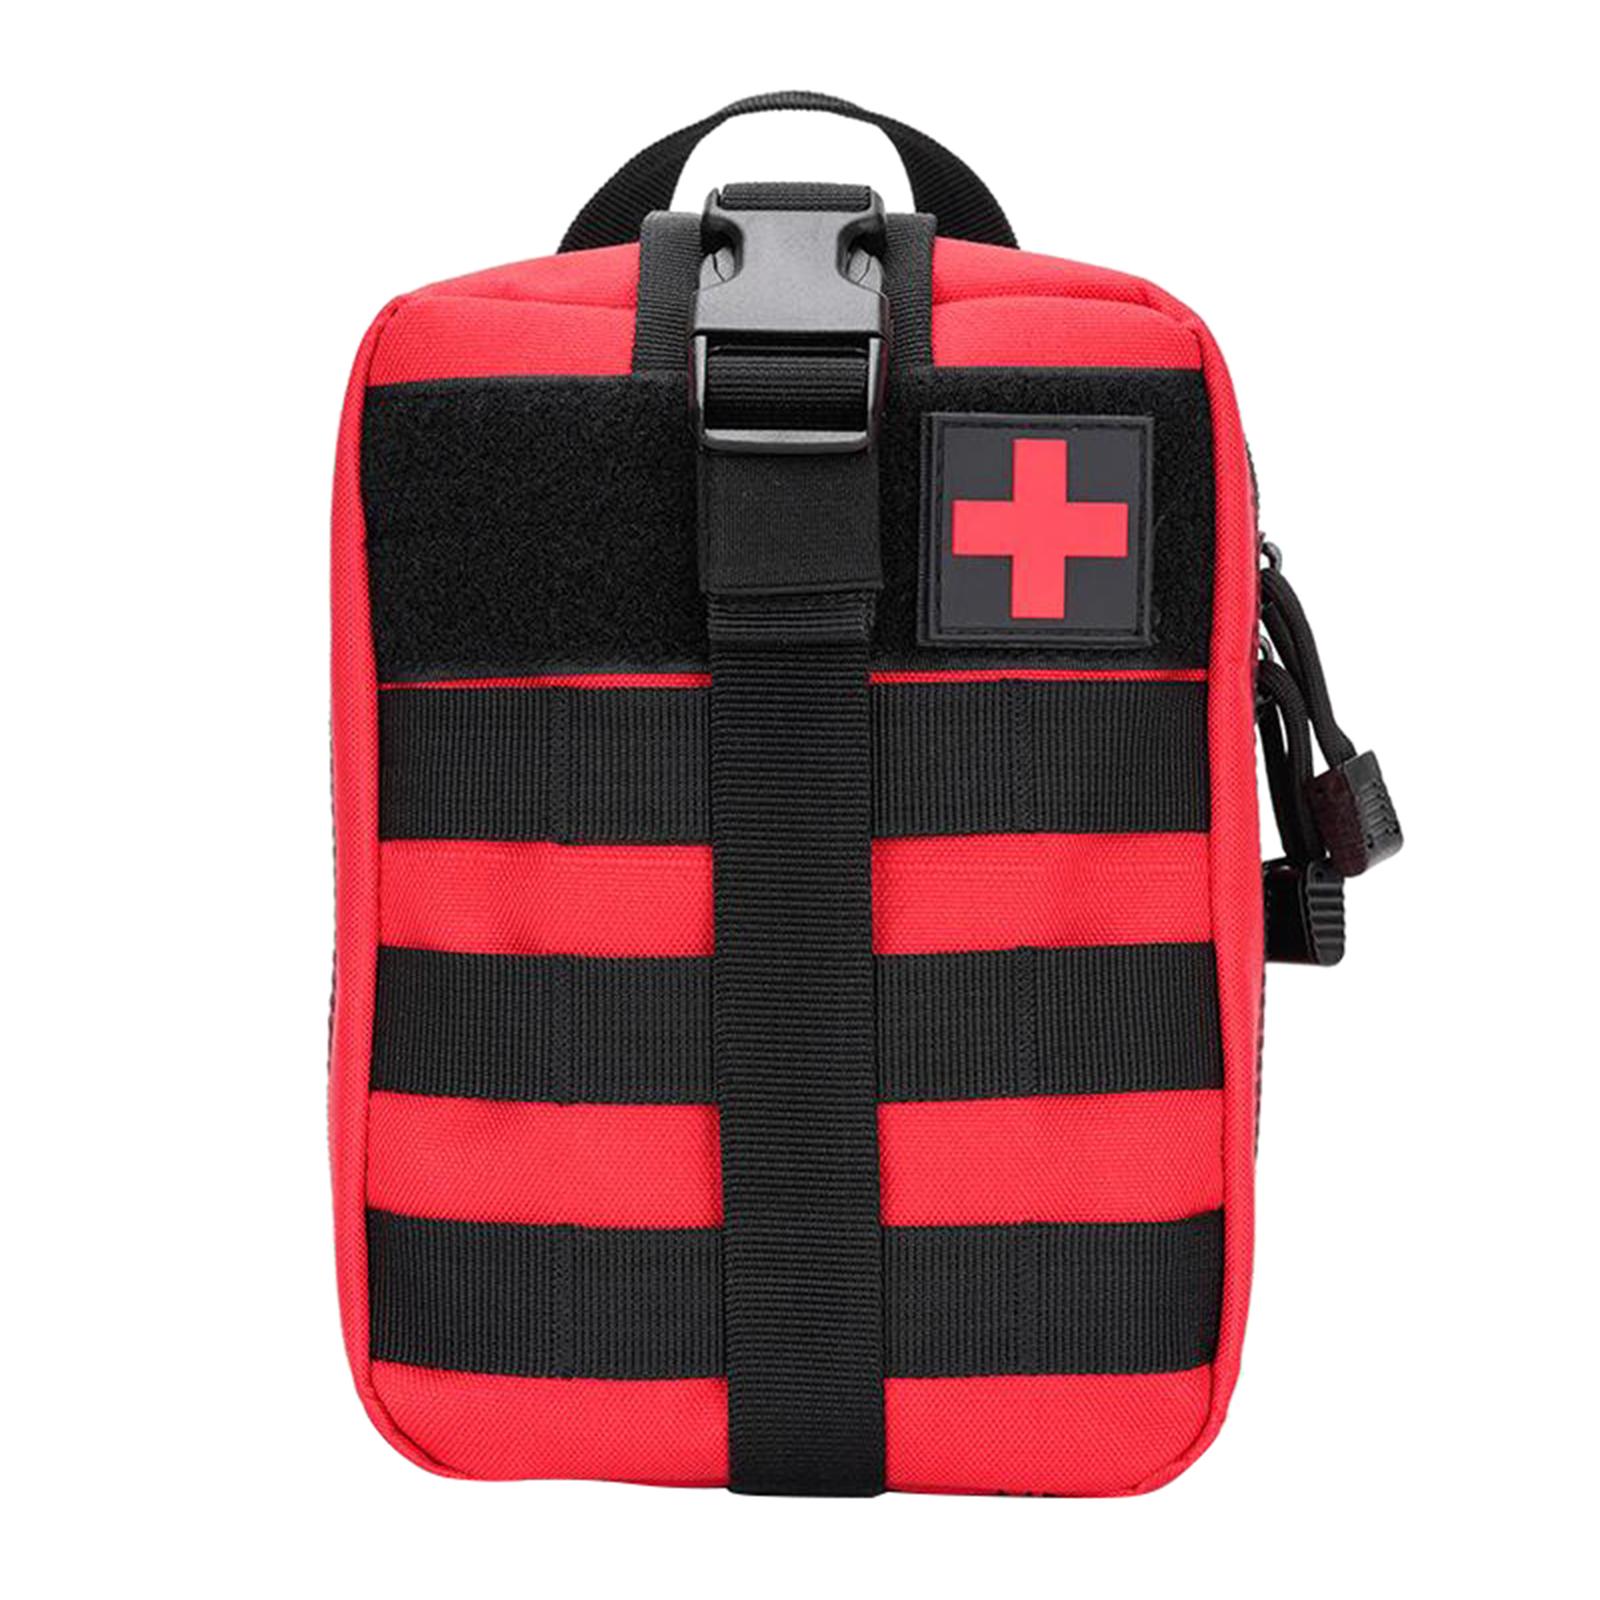 Tactical Bag First Aid Kit Outdoor Emergency Survival Pouch